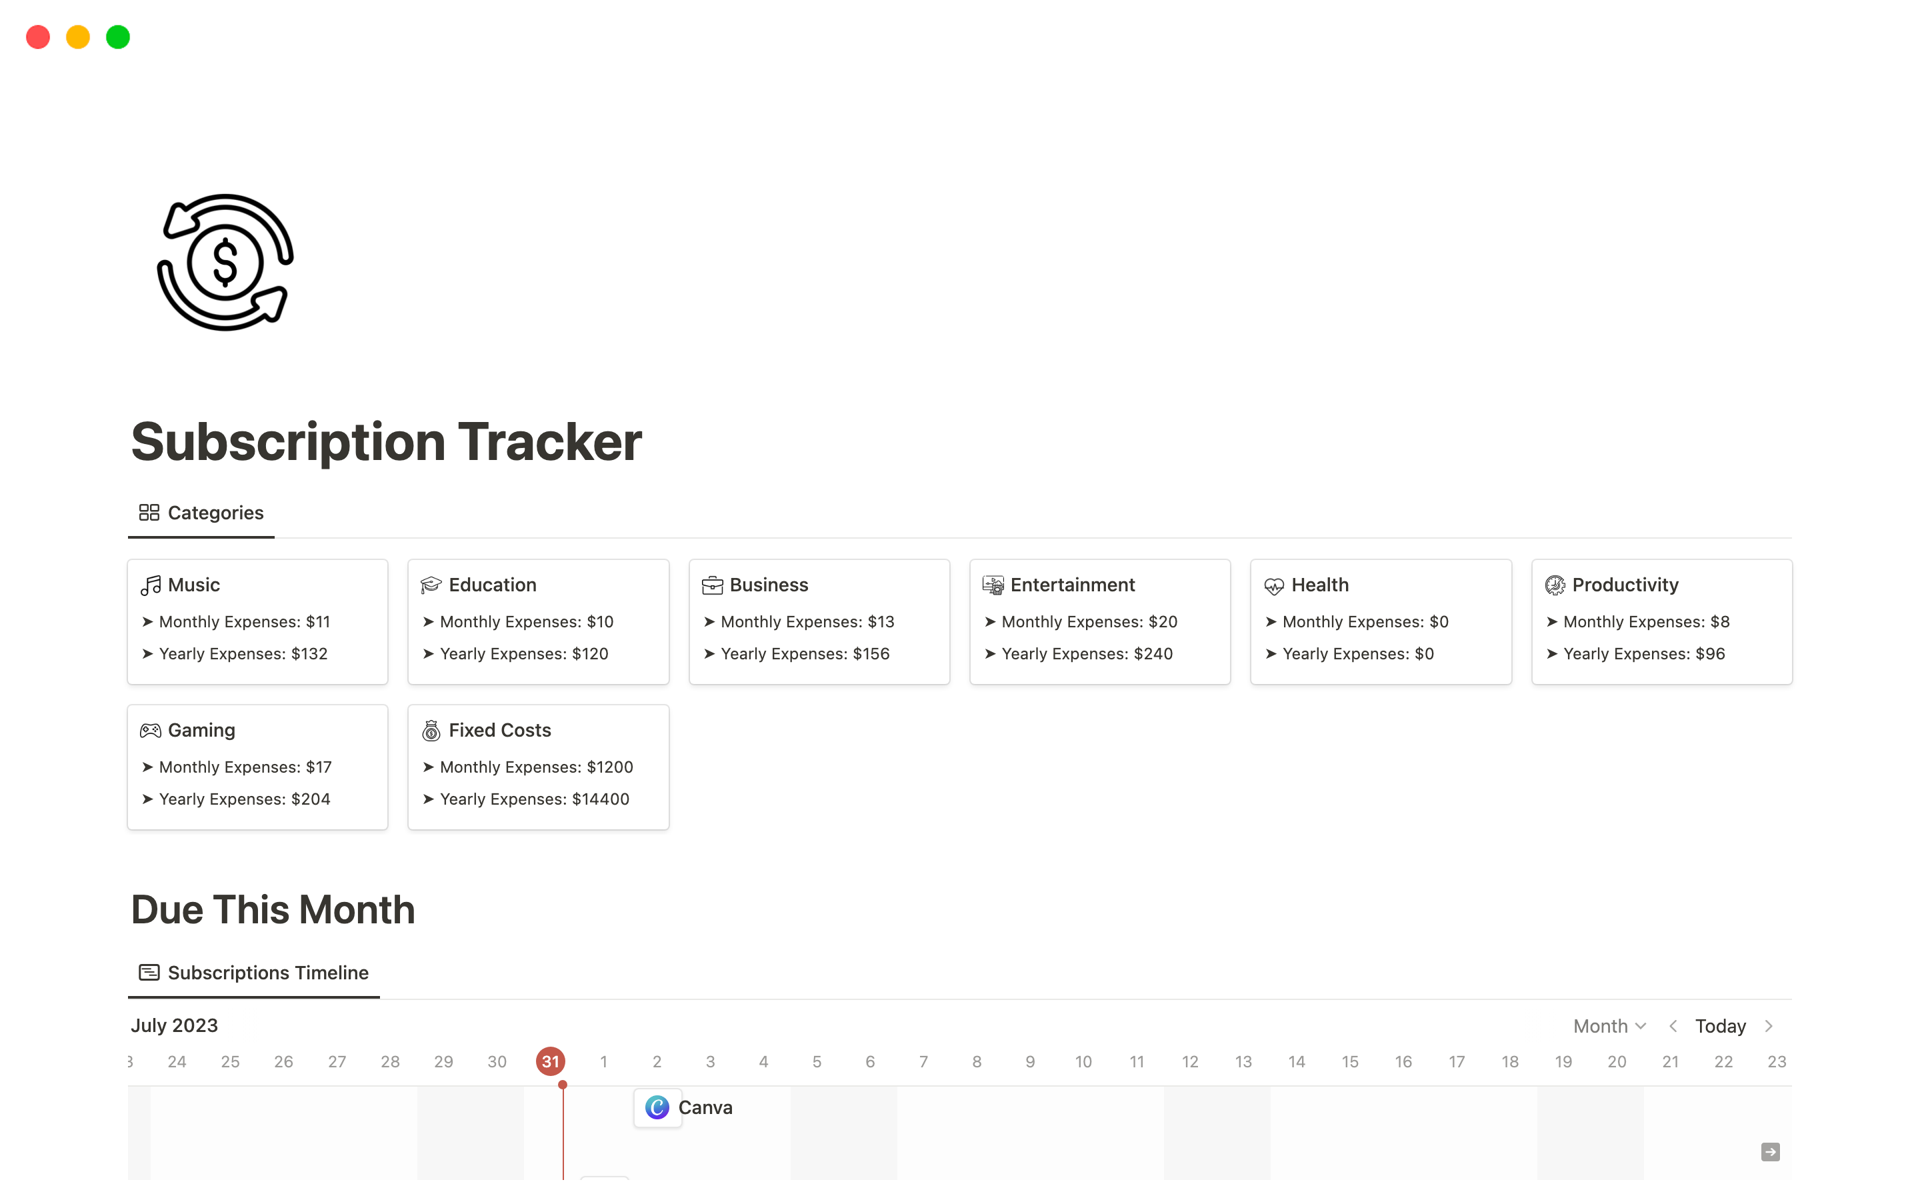 Stay on top of your subscriptions with this handy tracker template for Notion